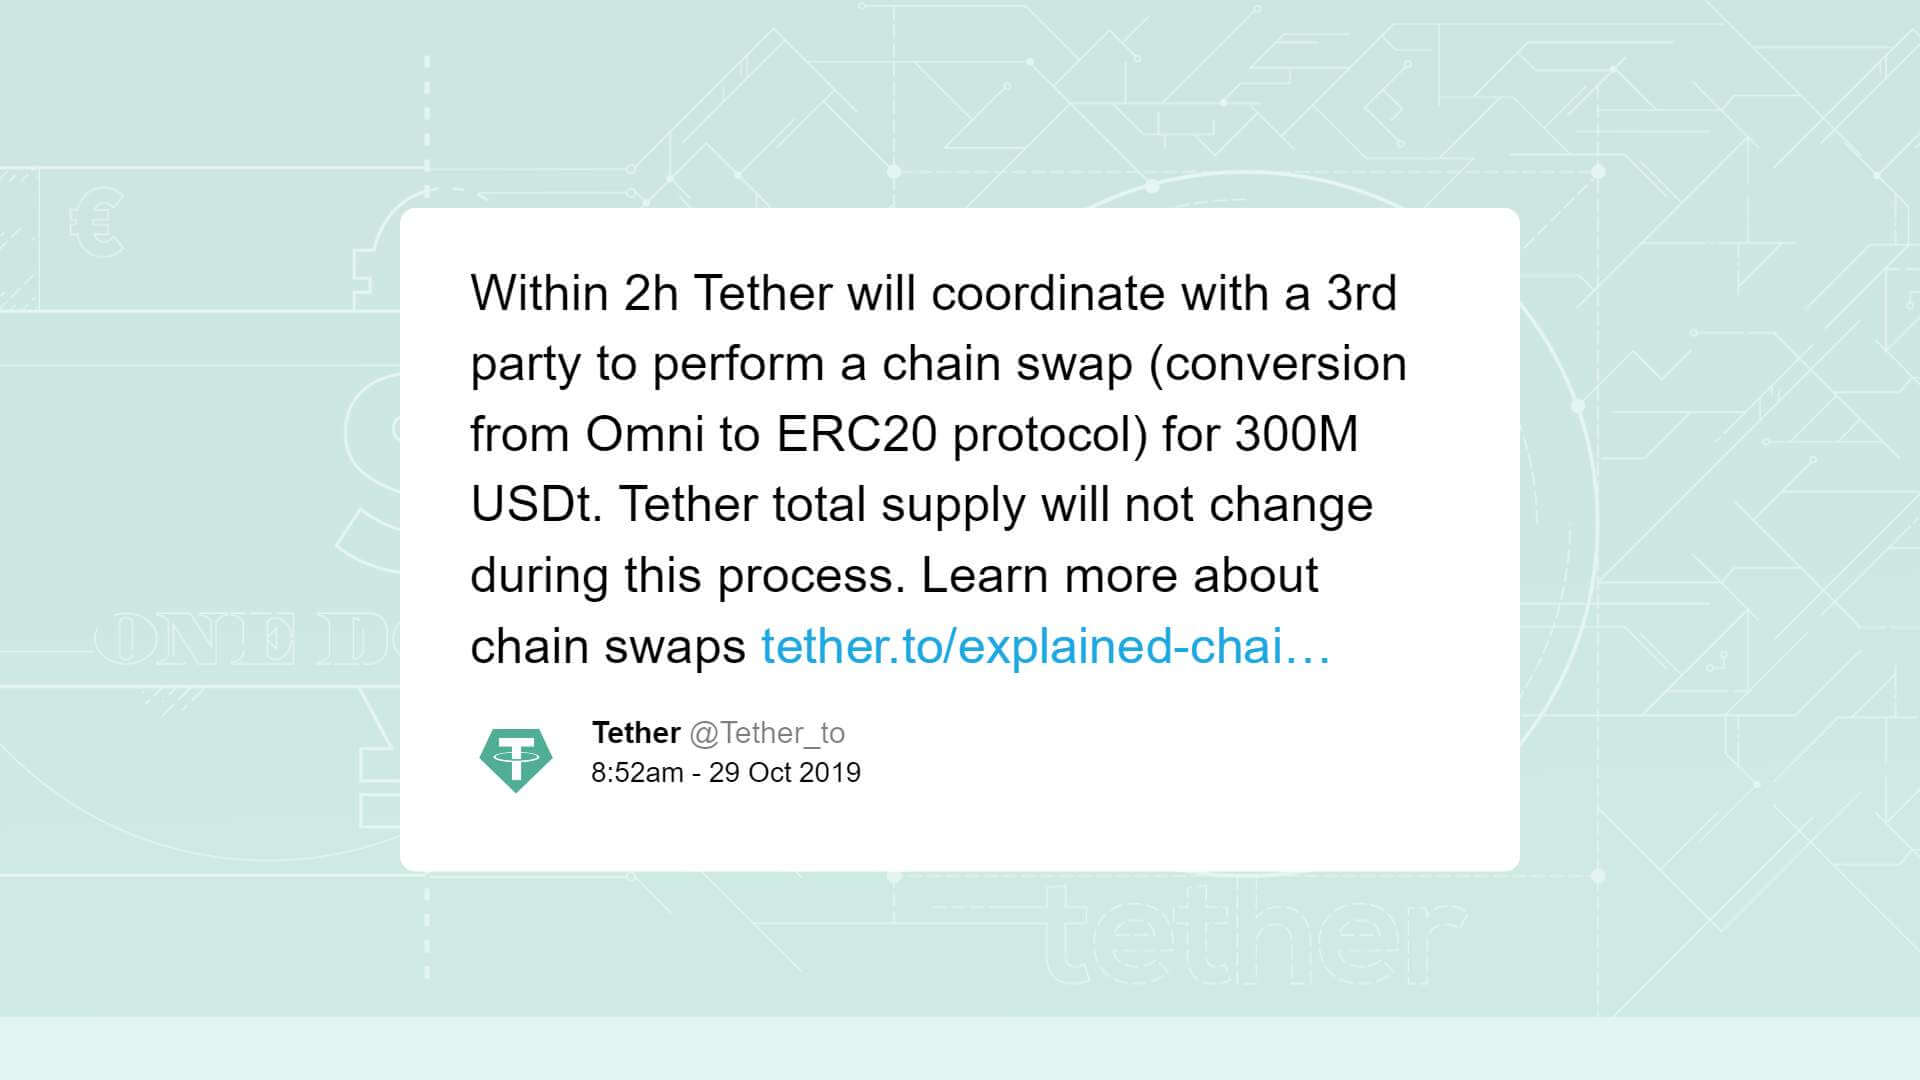 Tether conducted a 300M USDT chain swap from Omni to Ethereum